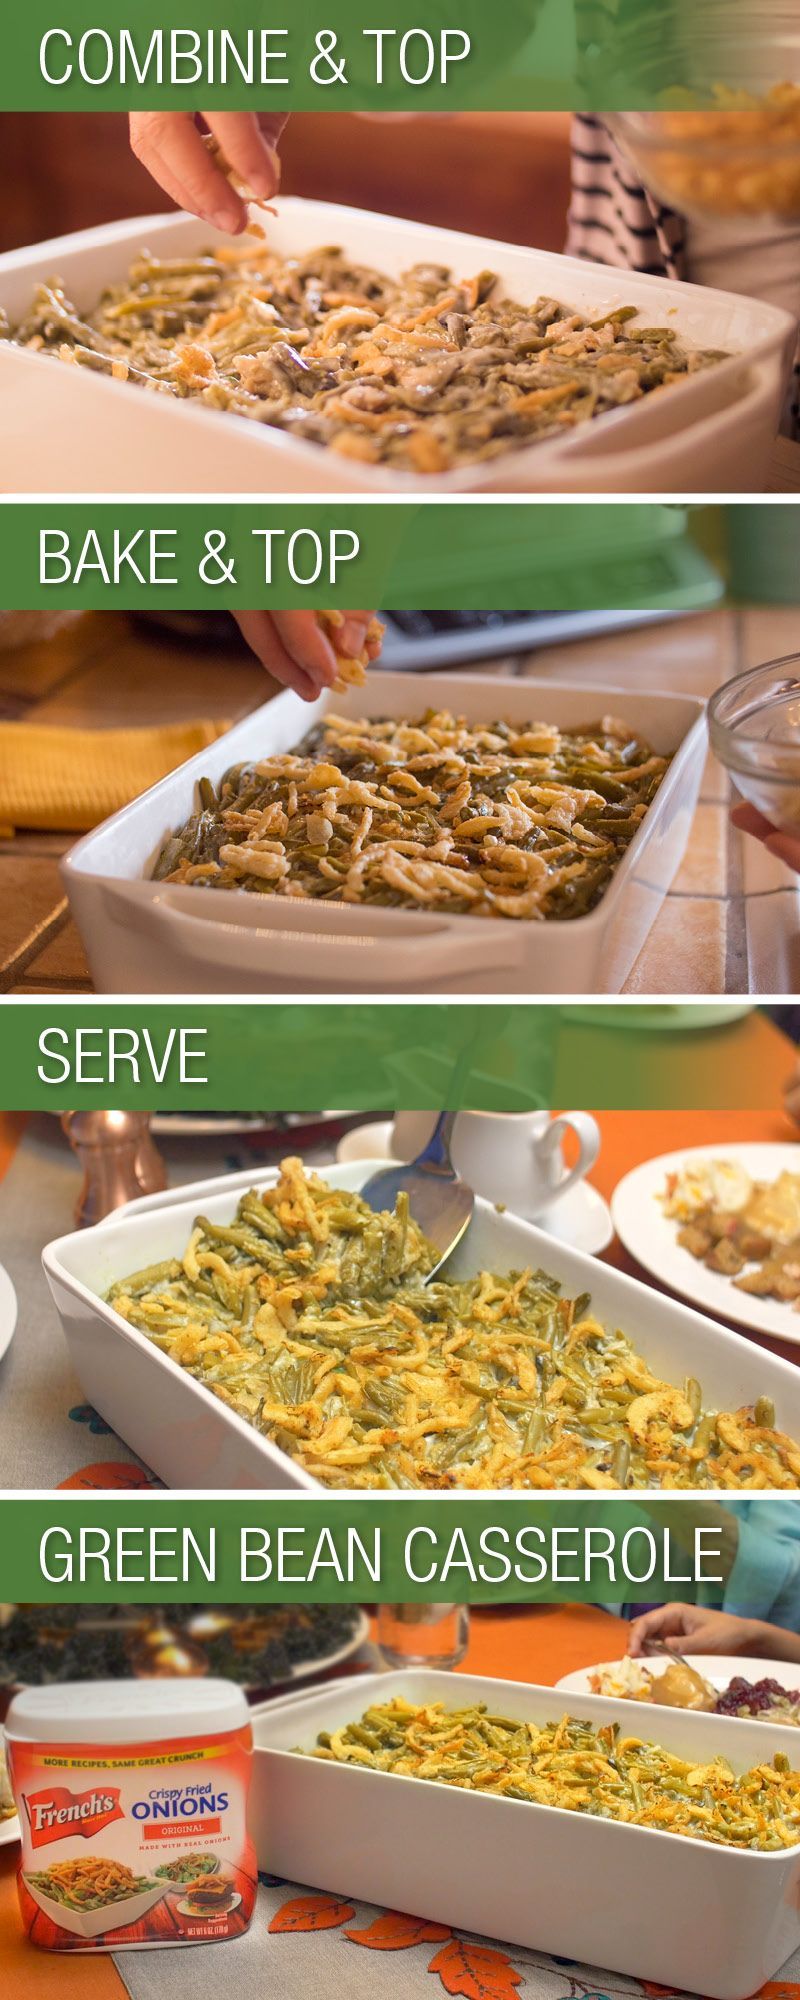 The essential holiday classic – French’s Green Been Casserole. French’s Crispy Fried Onions with green bea